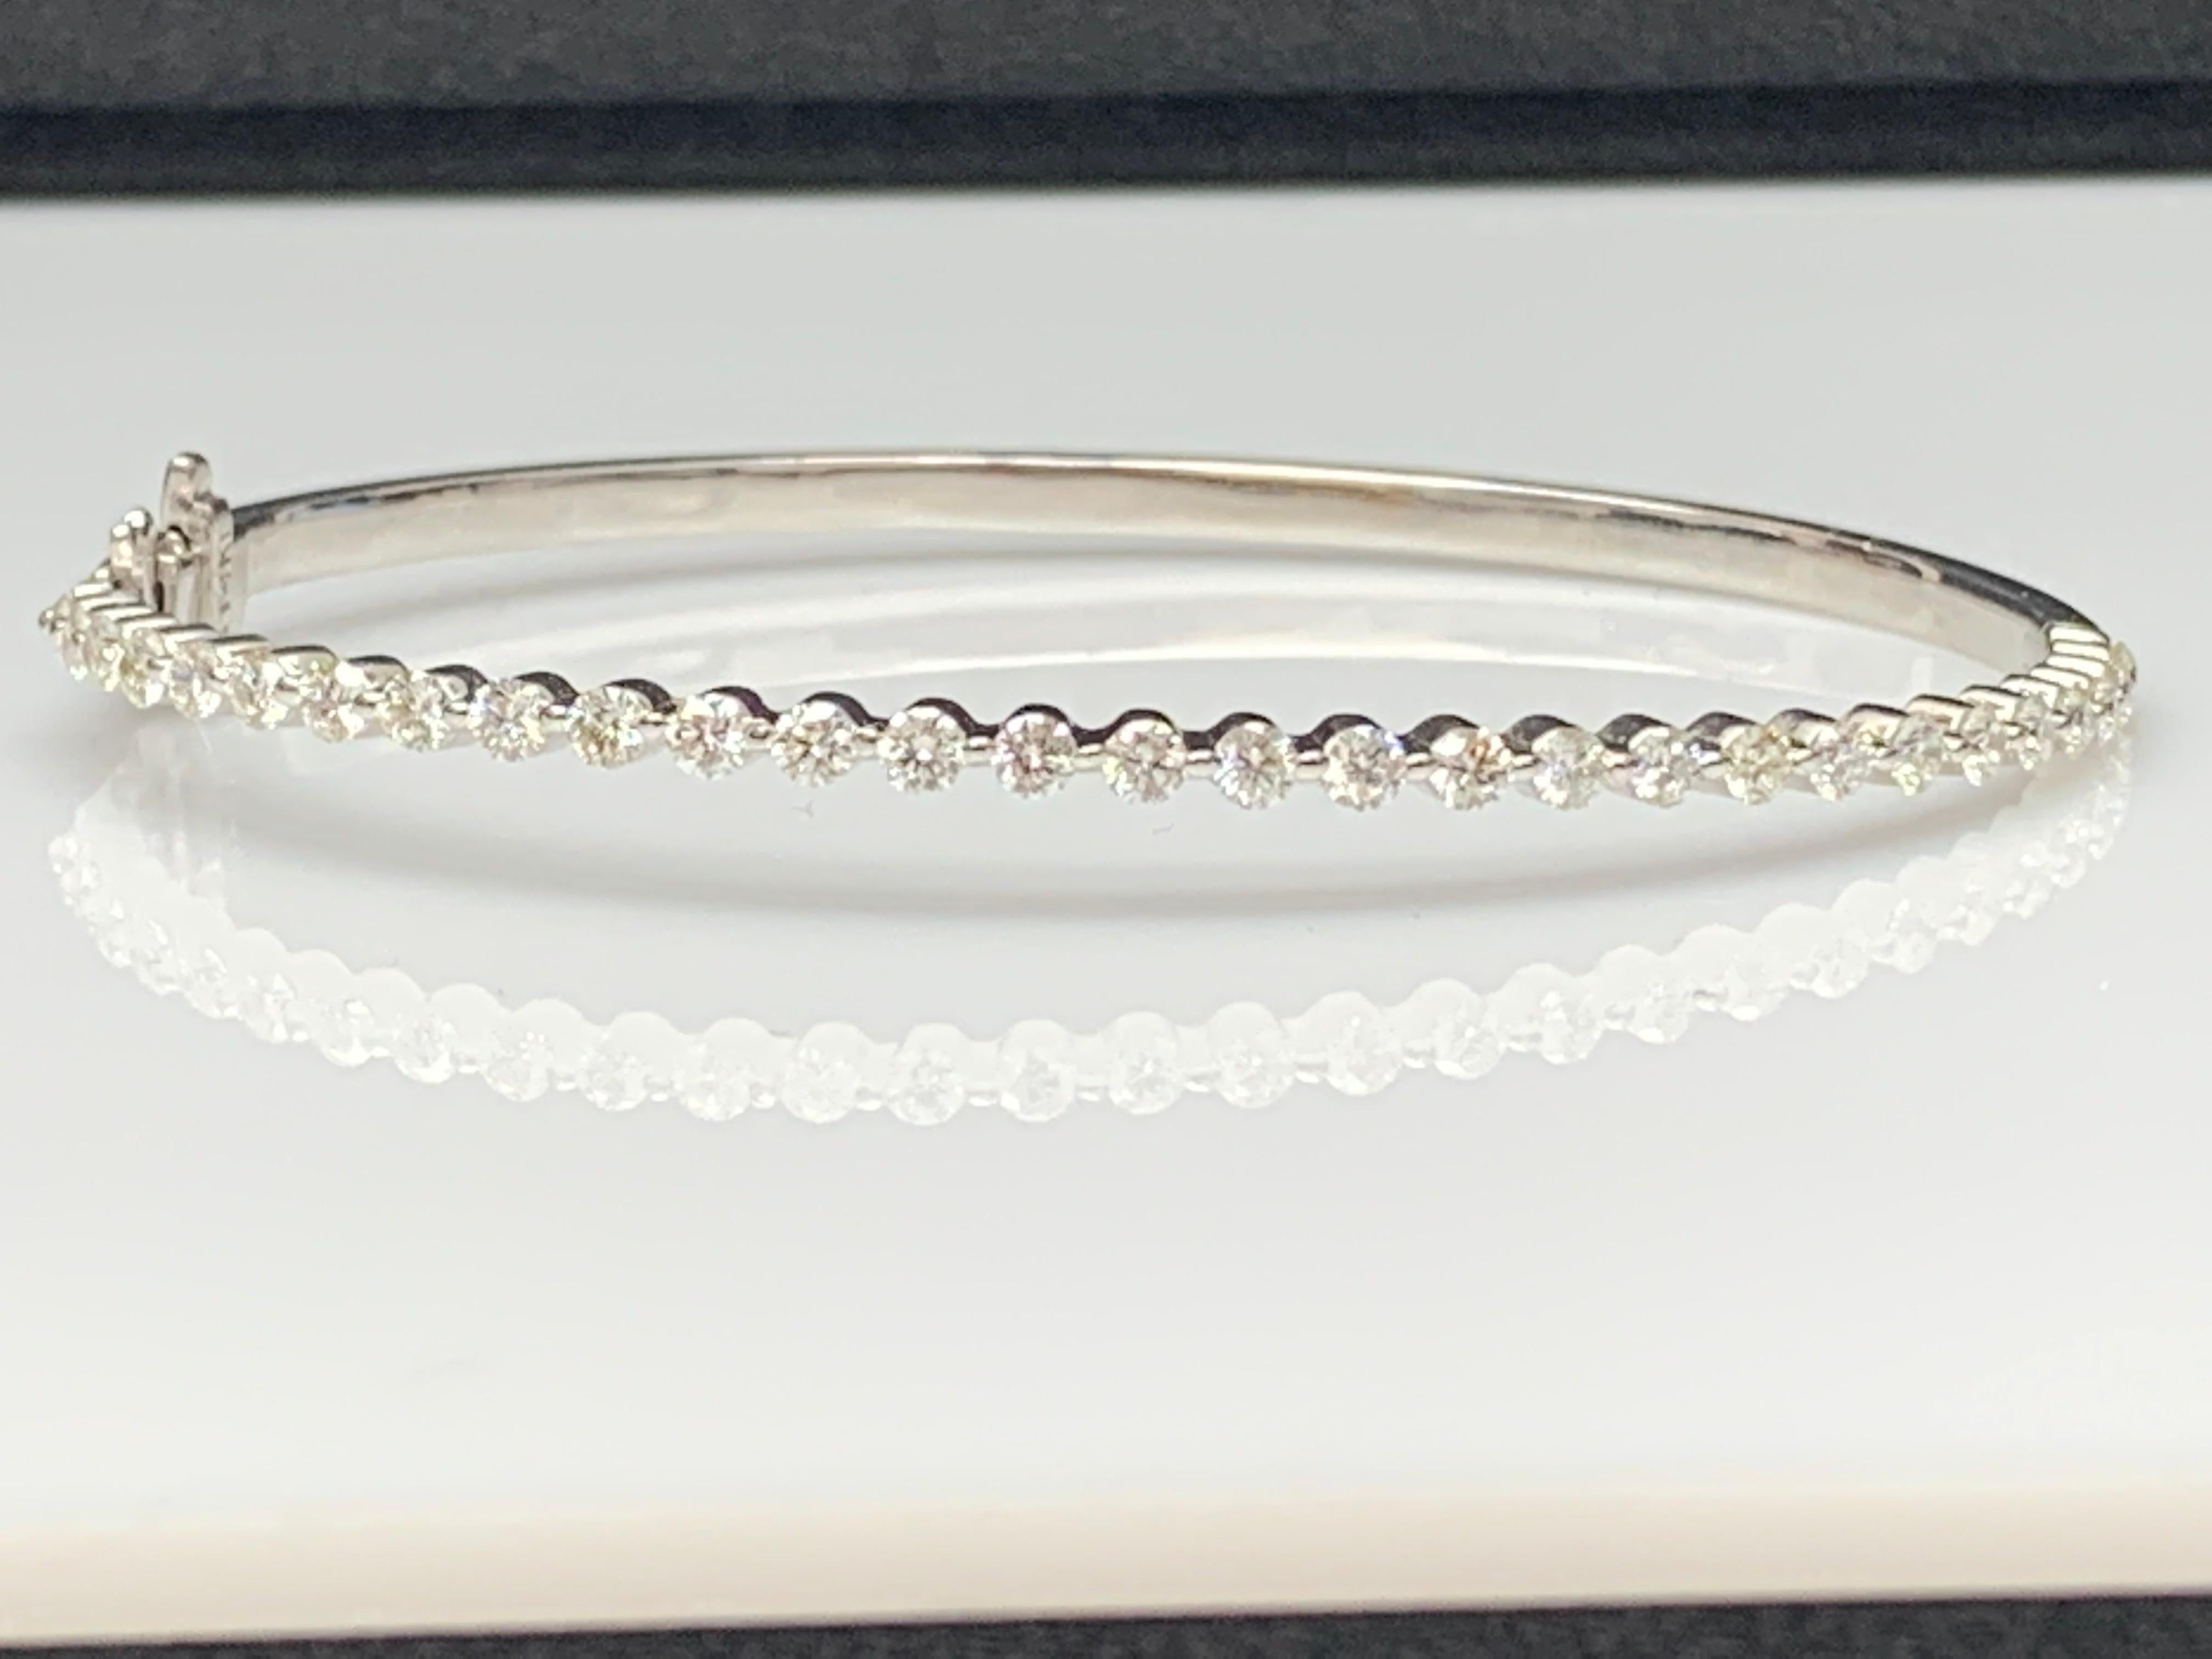 A stunning bangle bracelet set with 29 brilliant cut diamonds weighing 1.75 carat total. Set in polished 14k white gold. Double lock mechanism for maximum security. A simple yet dazzling piece.

All diamonds are GH color SI1 Clarity.
Style available